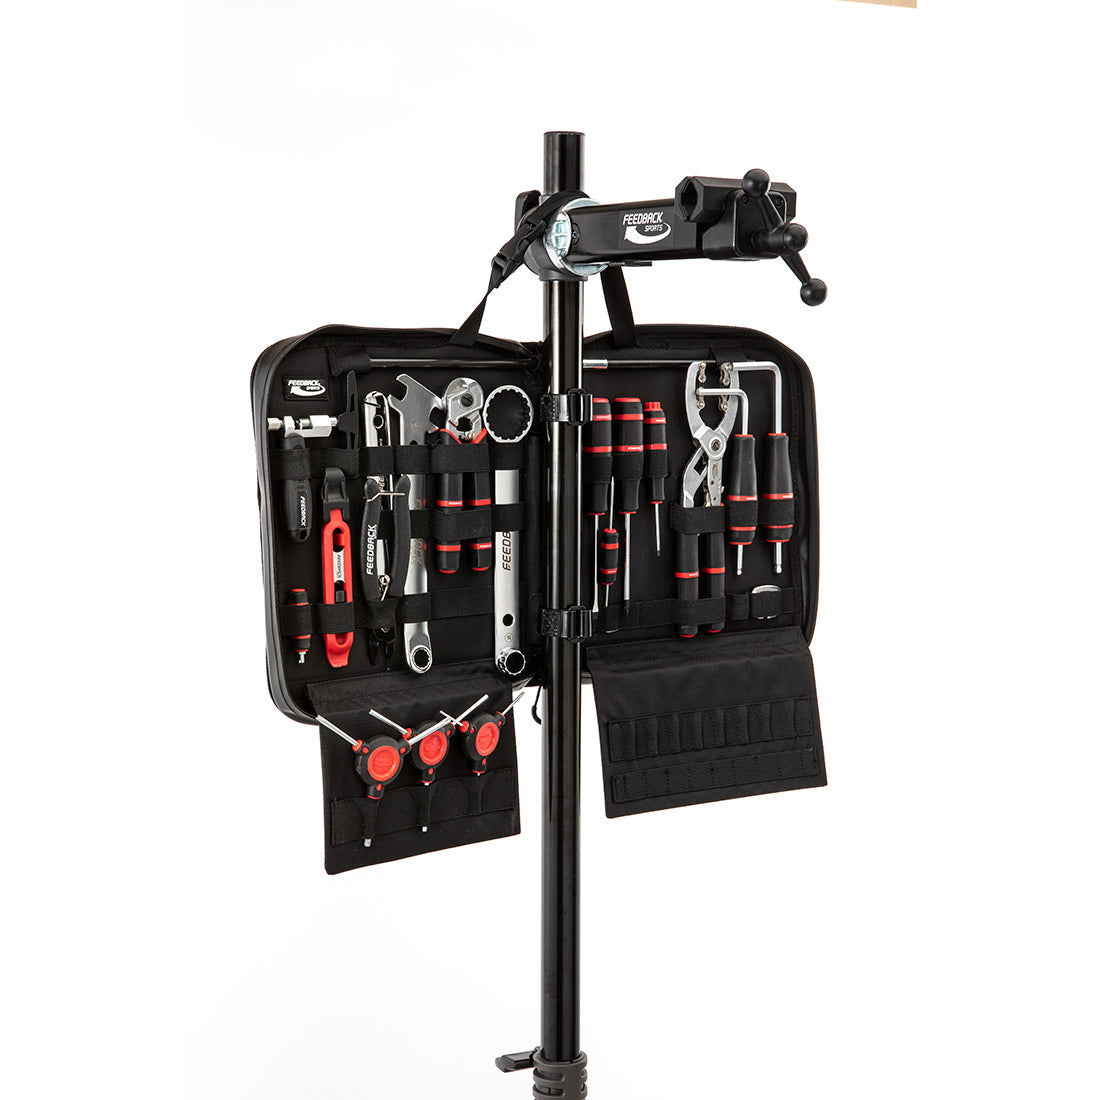 Feedback Sports Team Edition tool kit installed on Sport Mechanic repair stand ready to use.